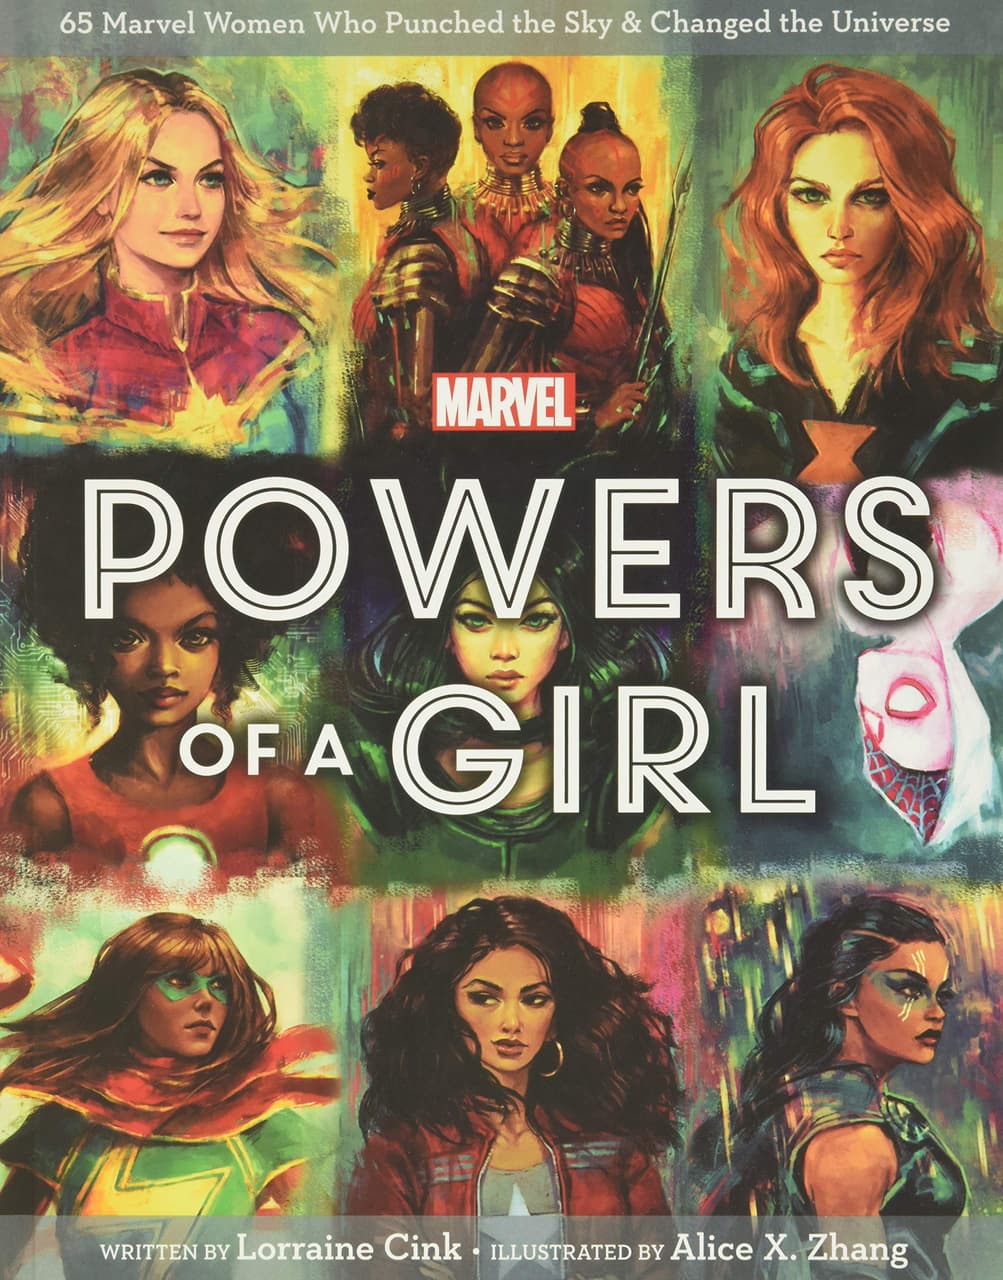 'Marvel: Powers of a Girl' cover by Alice X. Zhang